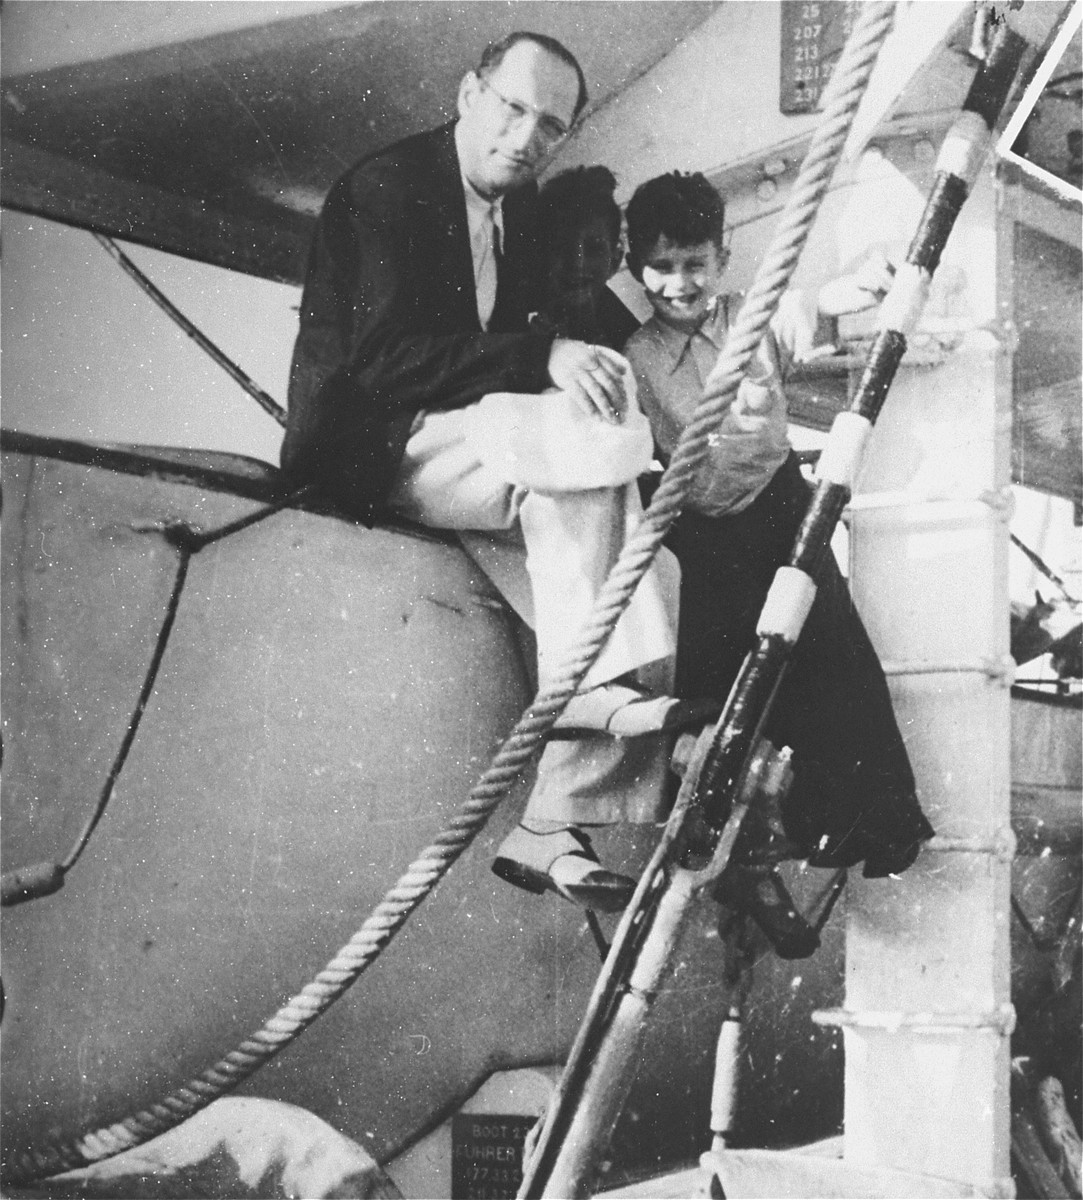 Hans Altschul sits next to his son Rolf on board the St. Louis.

Photo from the personal photo album assembled by Lotte Altschul.